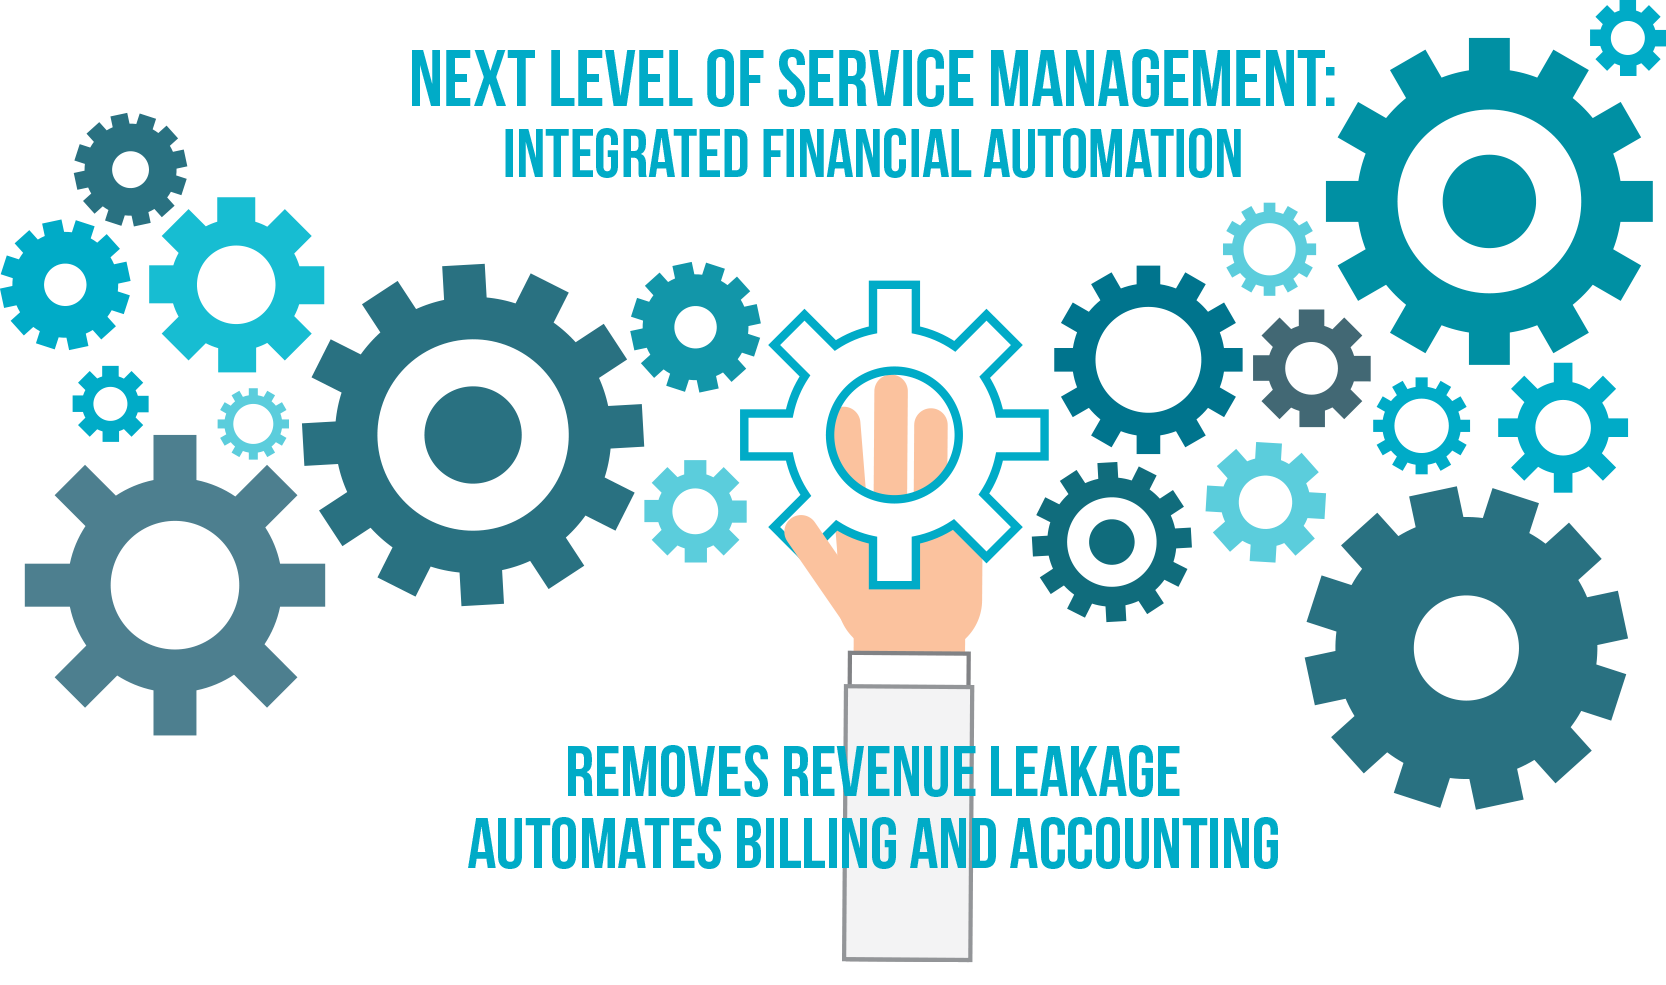 Why Integrated Financial Automation is the Next Level in Service Management?